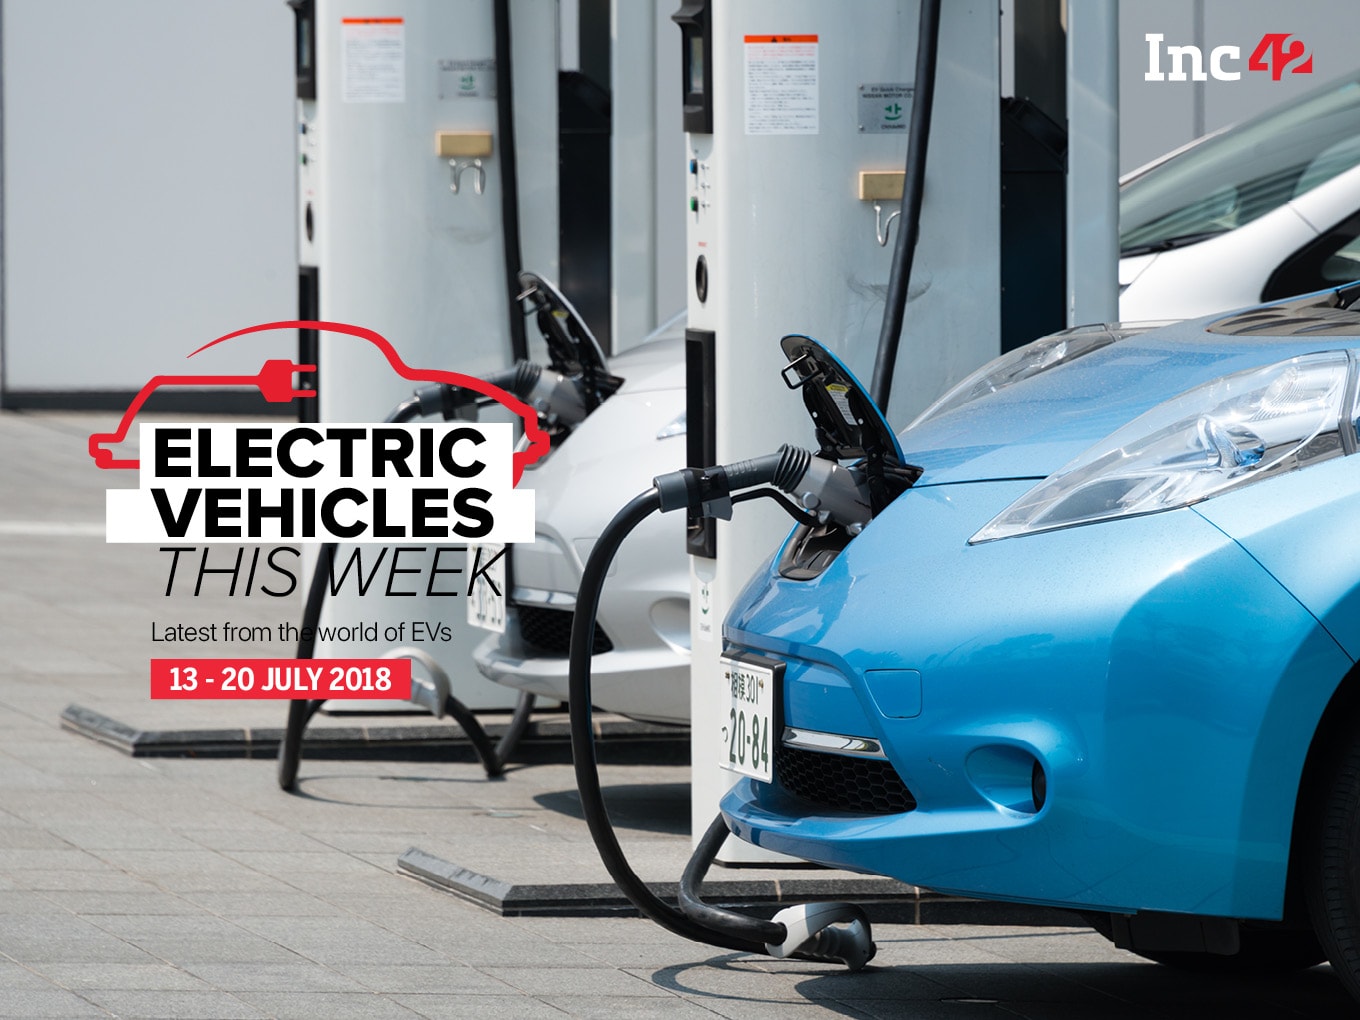 Electric Vehicles This Week: ISRO’s Lithium Ion Battery May Spur On Country’s EV Technology